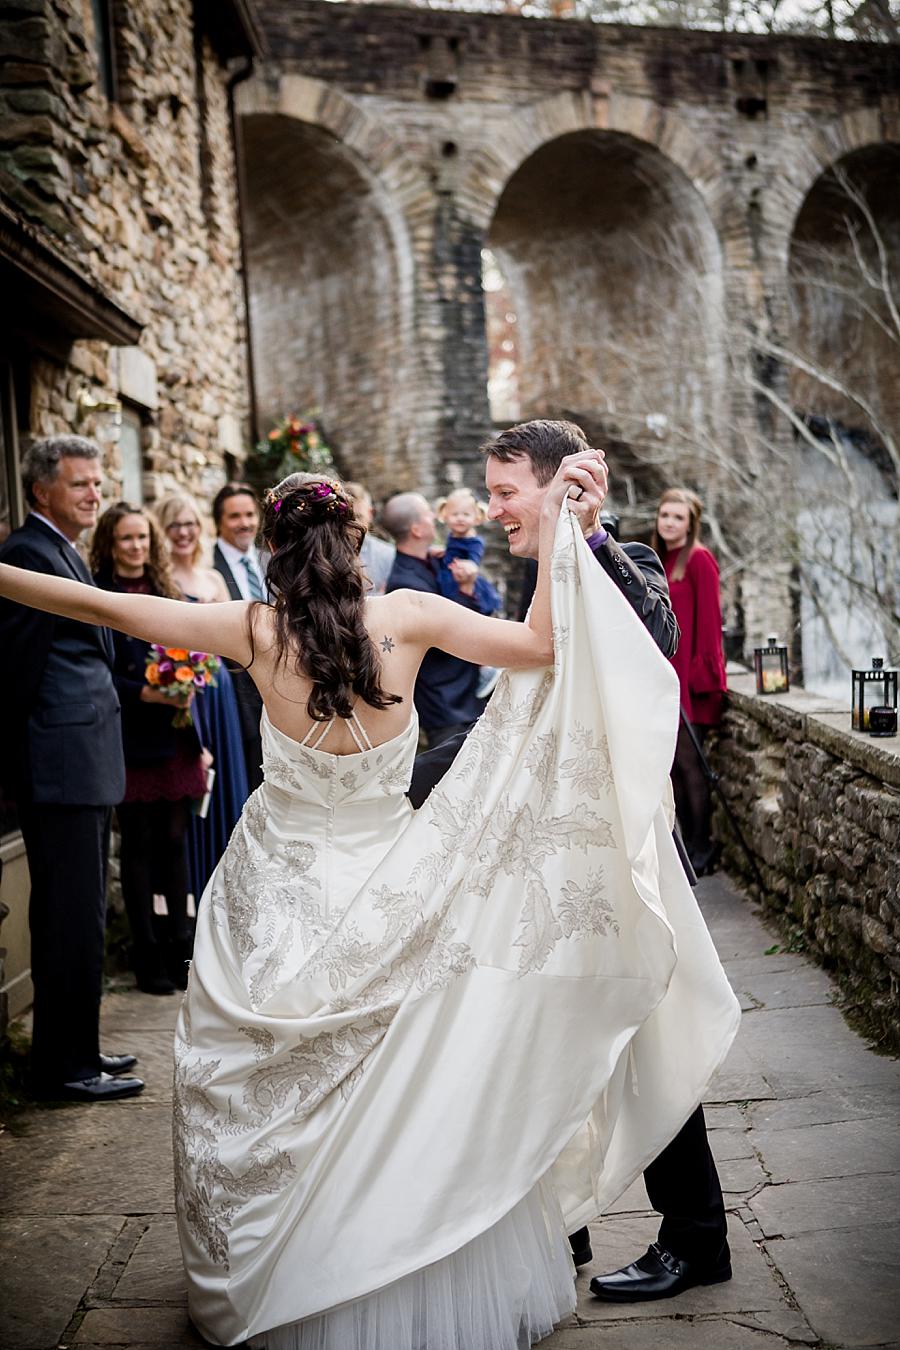 Twirling the bride during the first dance at this Cumberland Mountain State Park wedding by Knoxville Wedding Photographer, Amanda May Photos.